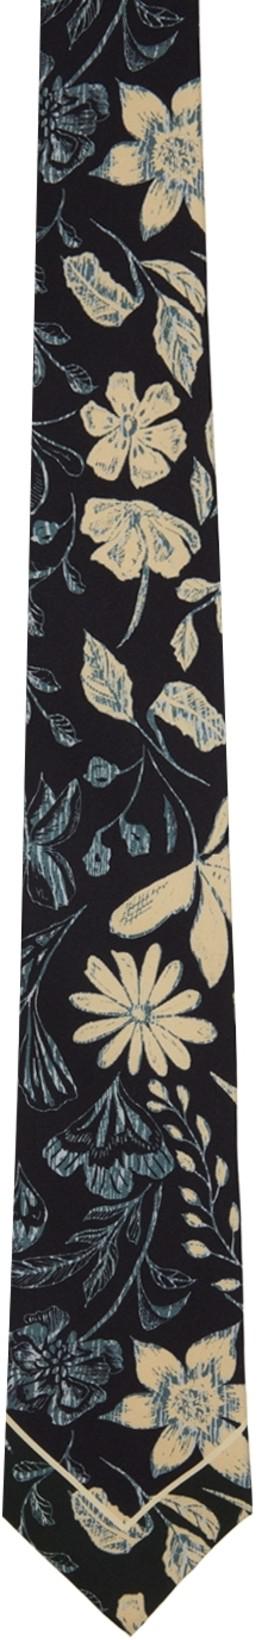 Black Mixed Floral Tie by PAUL SMITH